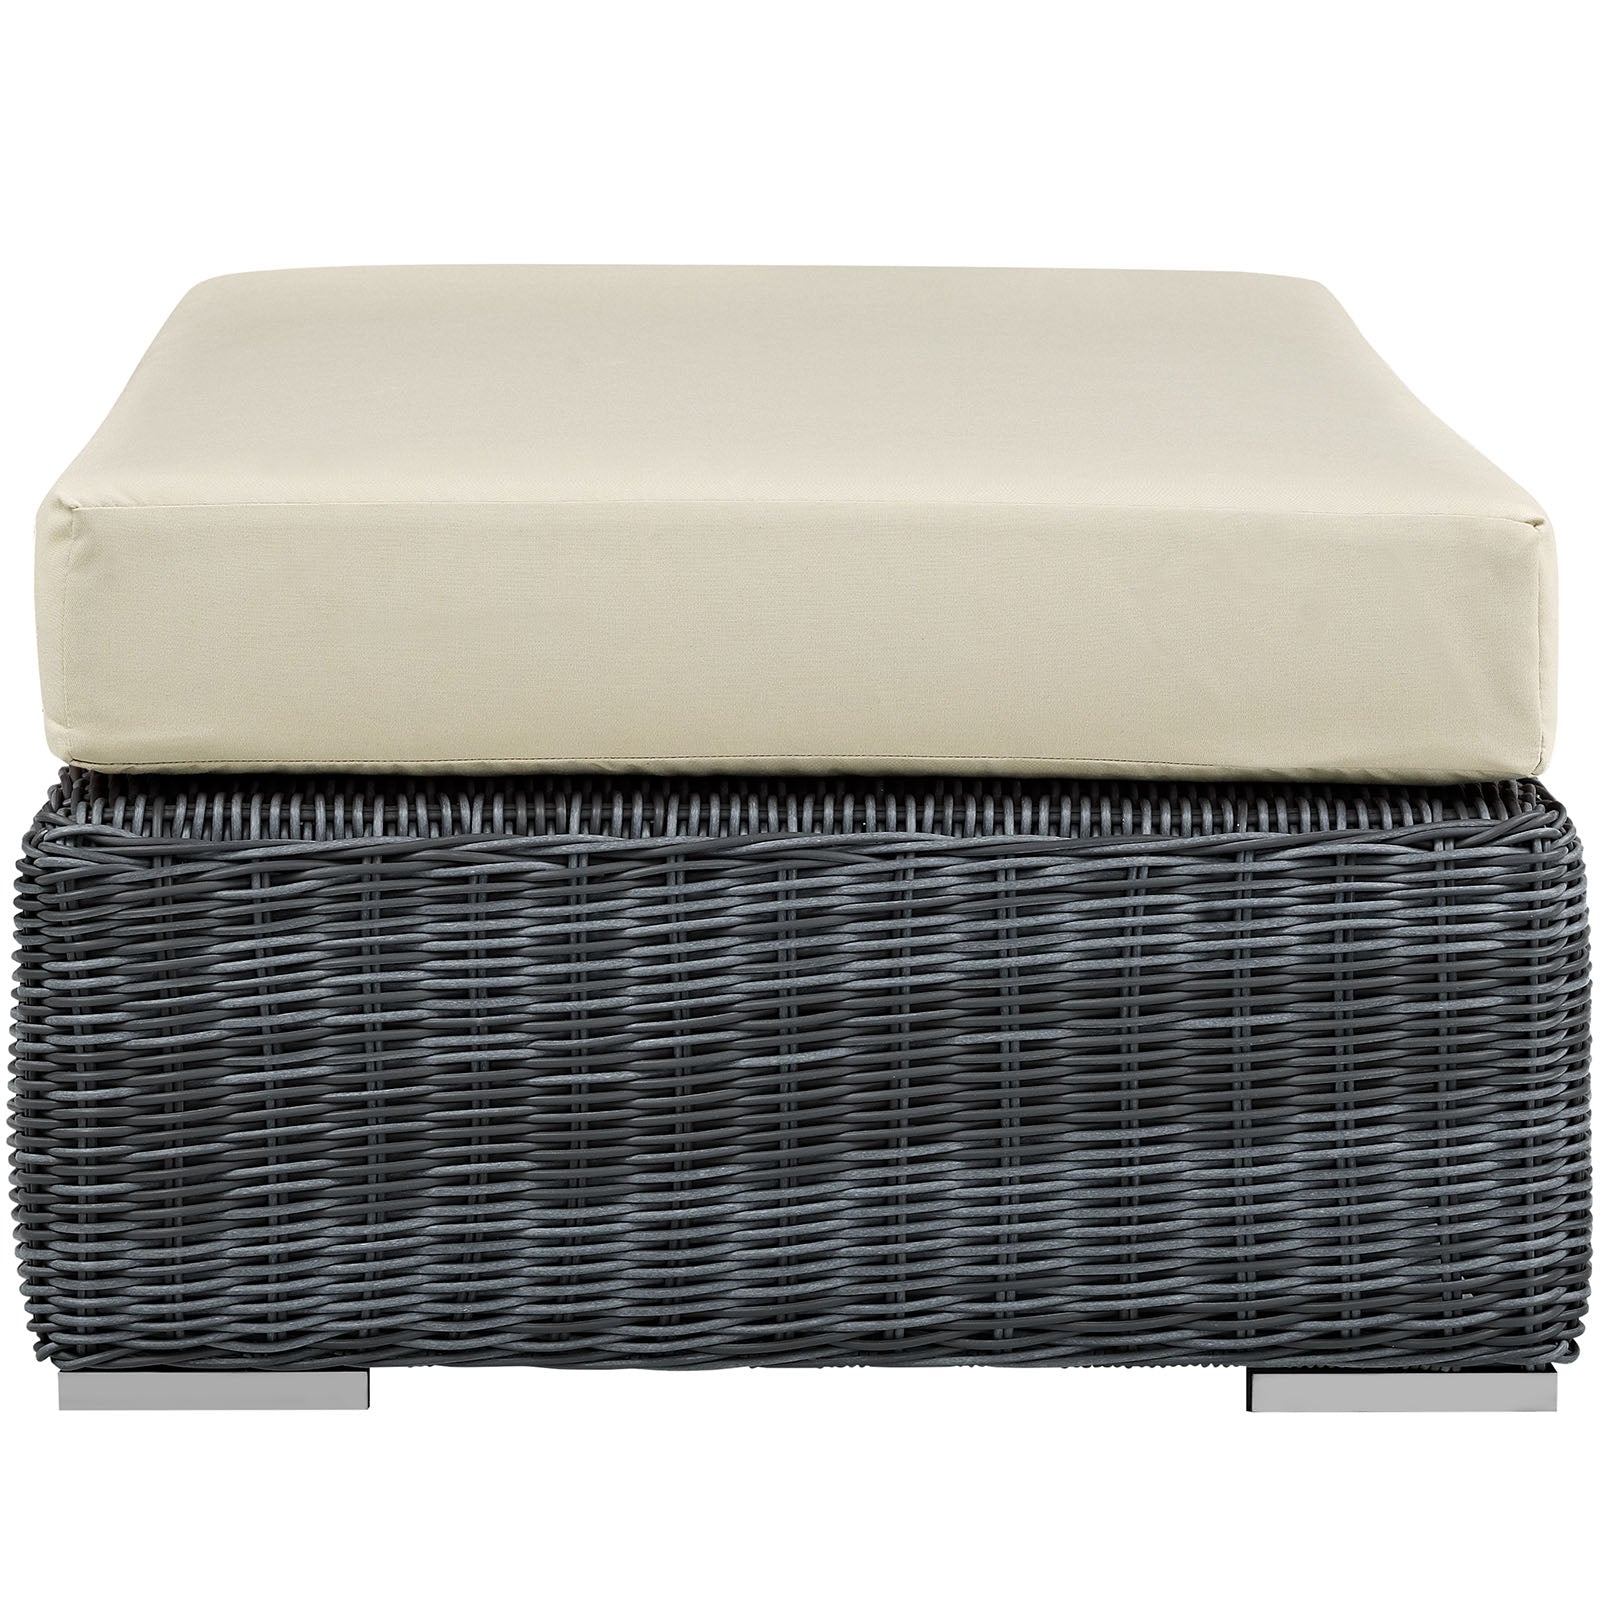 Modway Outdoor Stools & Benches - Summon Outdoor Patio Rectangle Ottoman Canvas Antique Beige